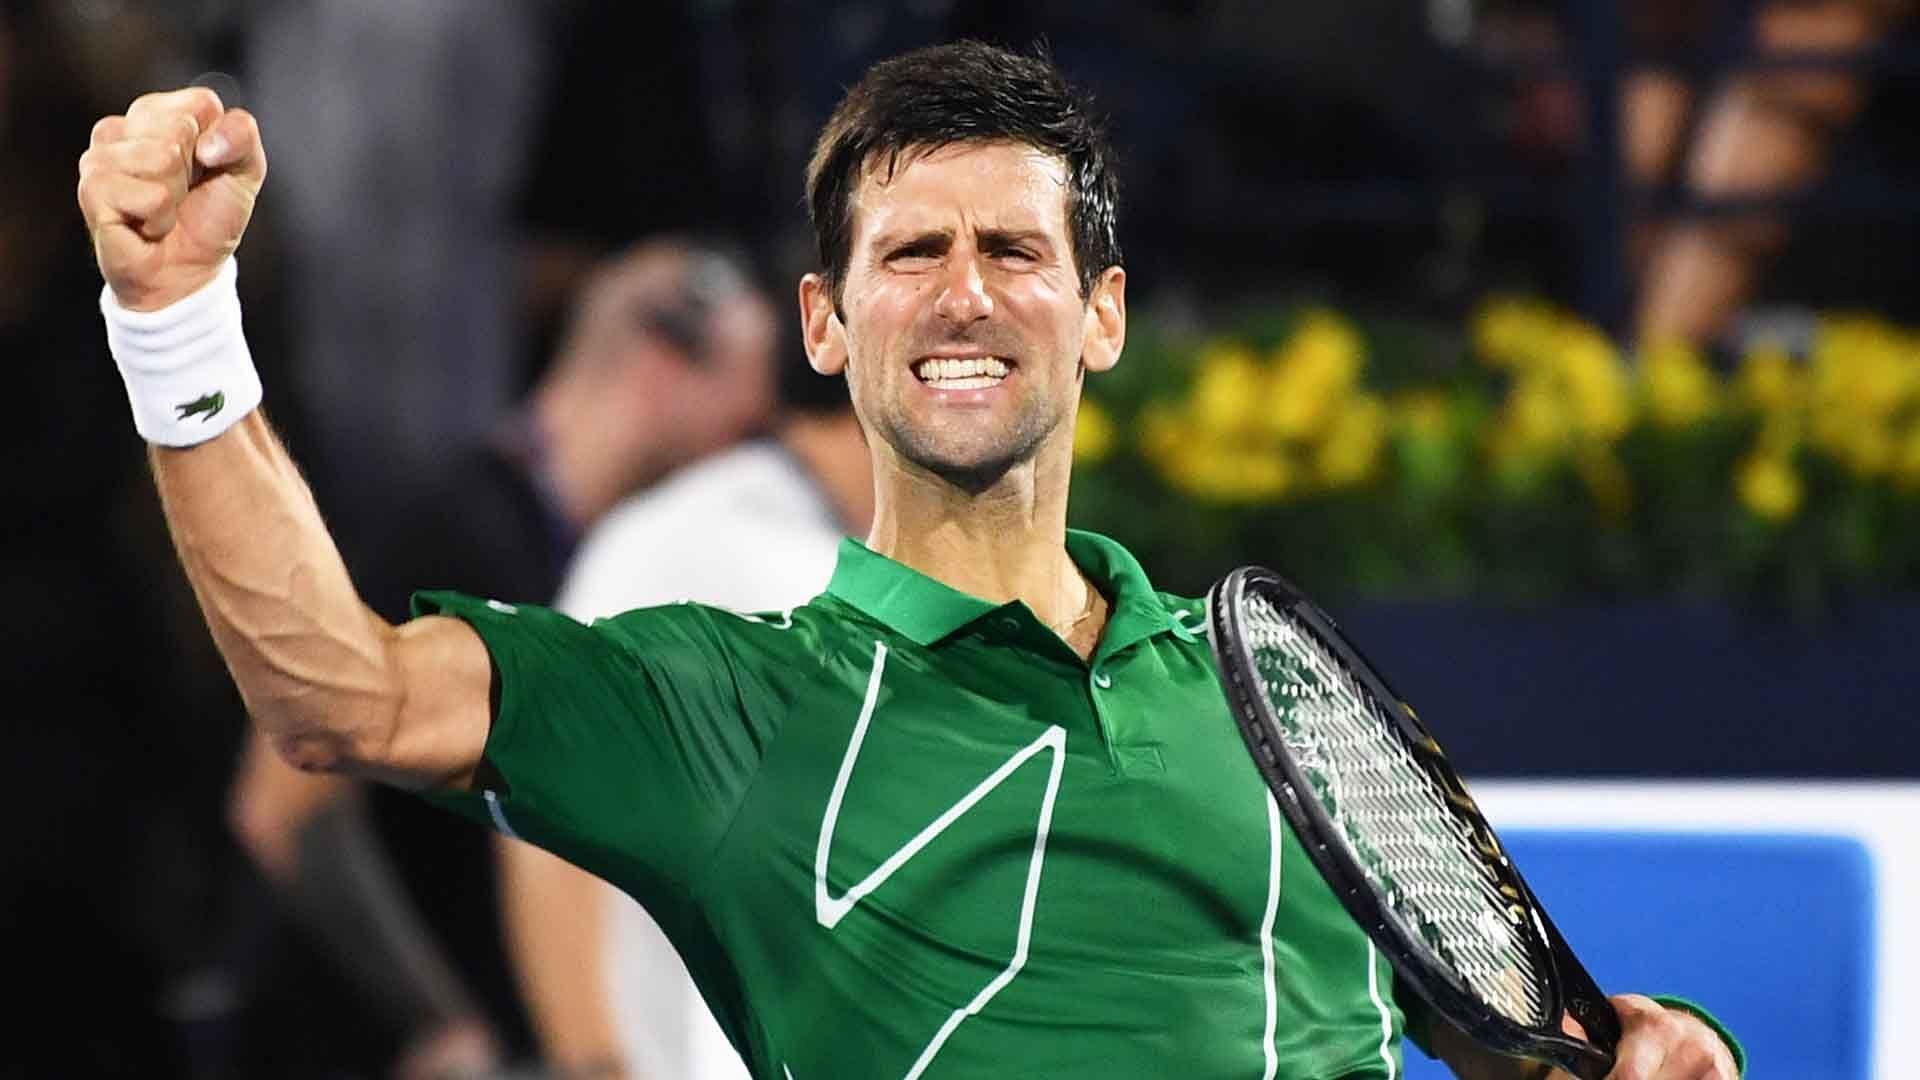 The World No. 1 at the Dubai Tennis Championships in 2020